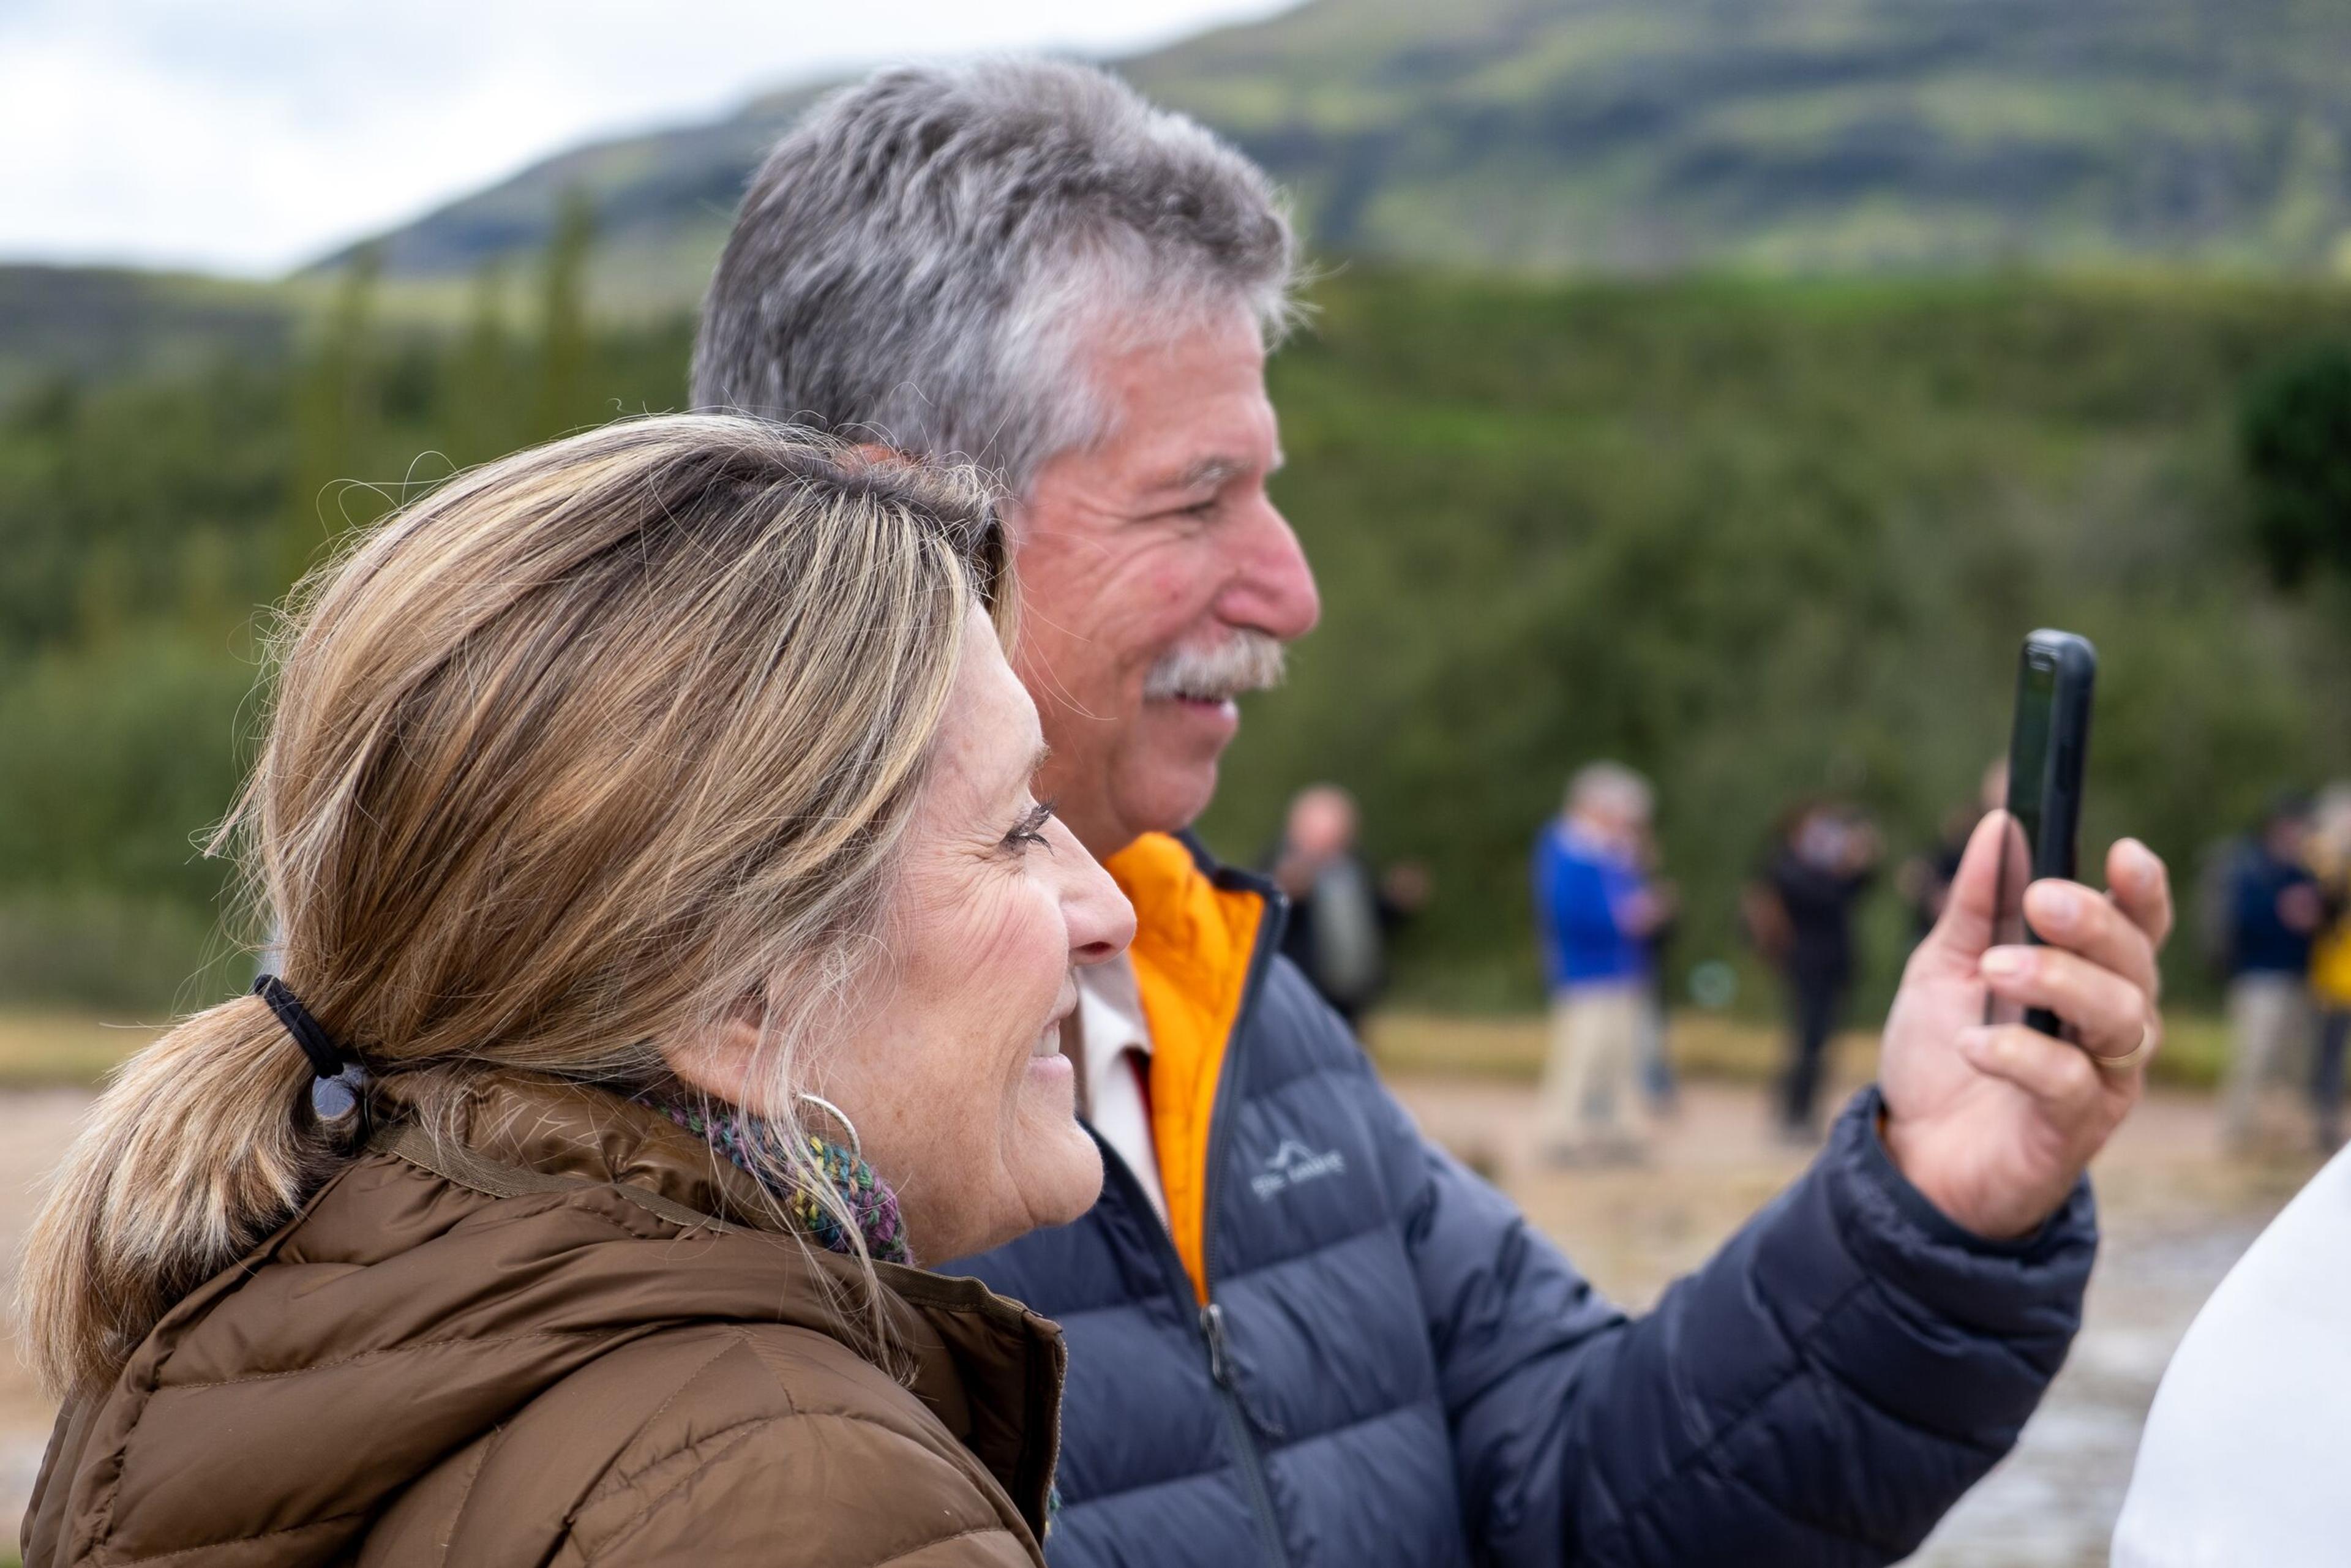 Two adults are smiling and taking a selfie with a smartphone, with other tourists and a green landscape in the background.